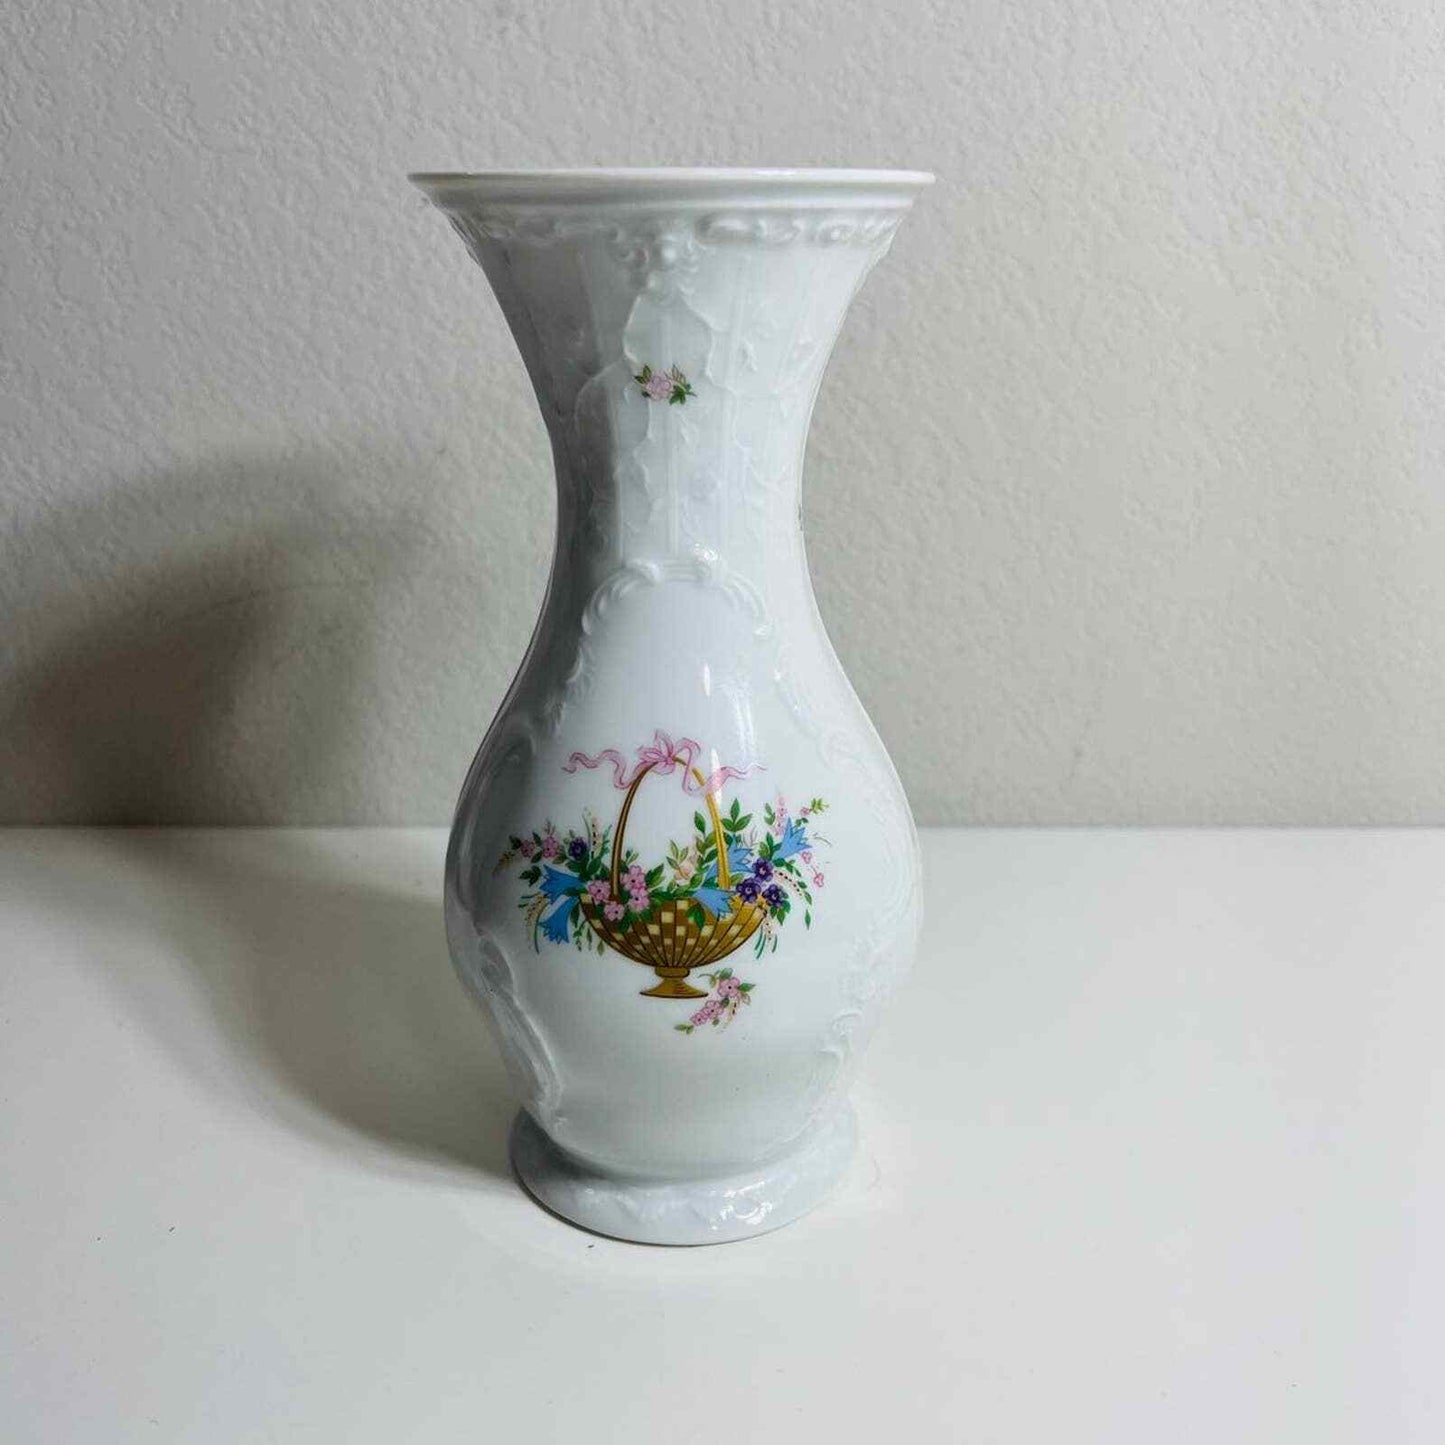 Rosenthal Floral Vase Classic Rose Collection Germany Pottery Home Decor